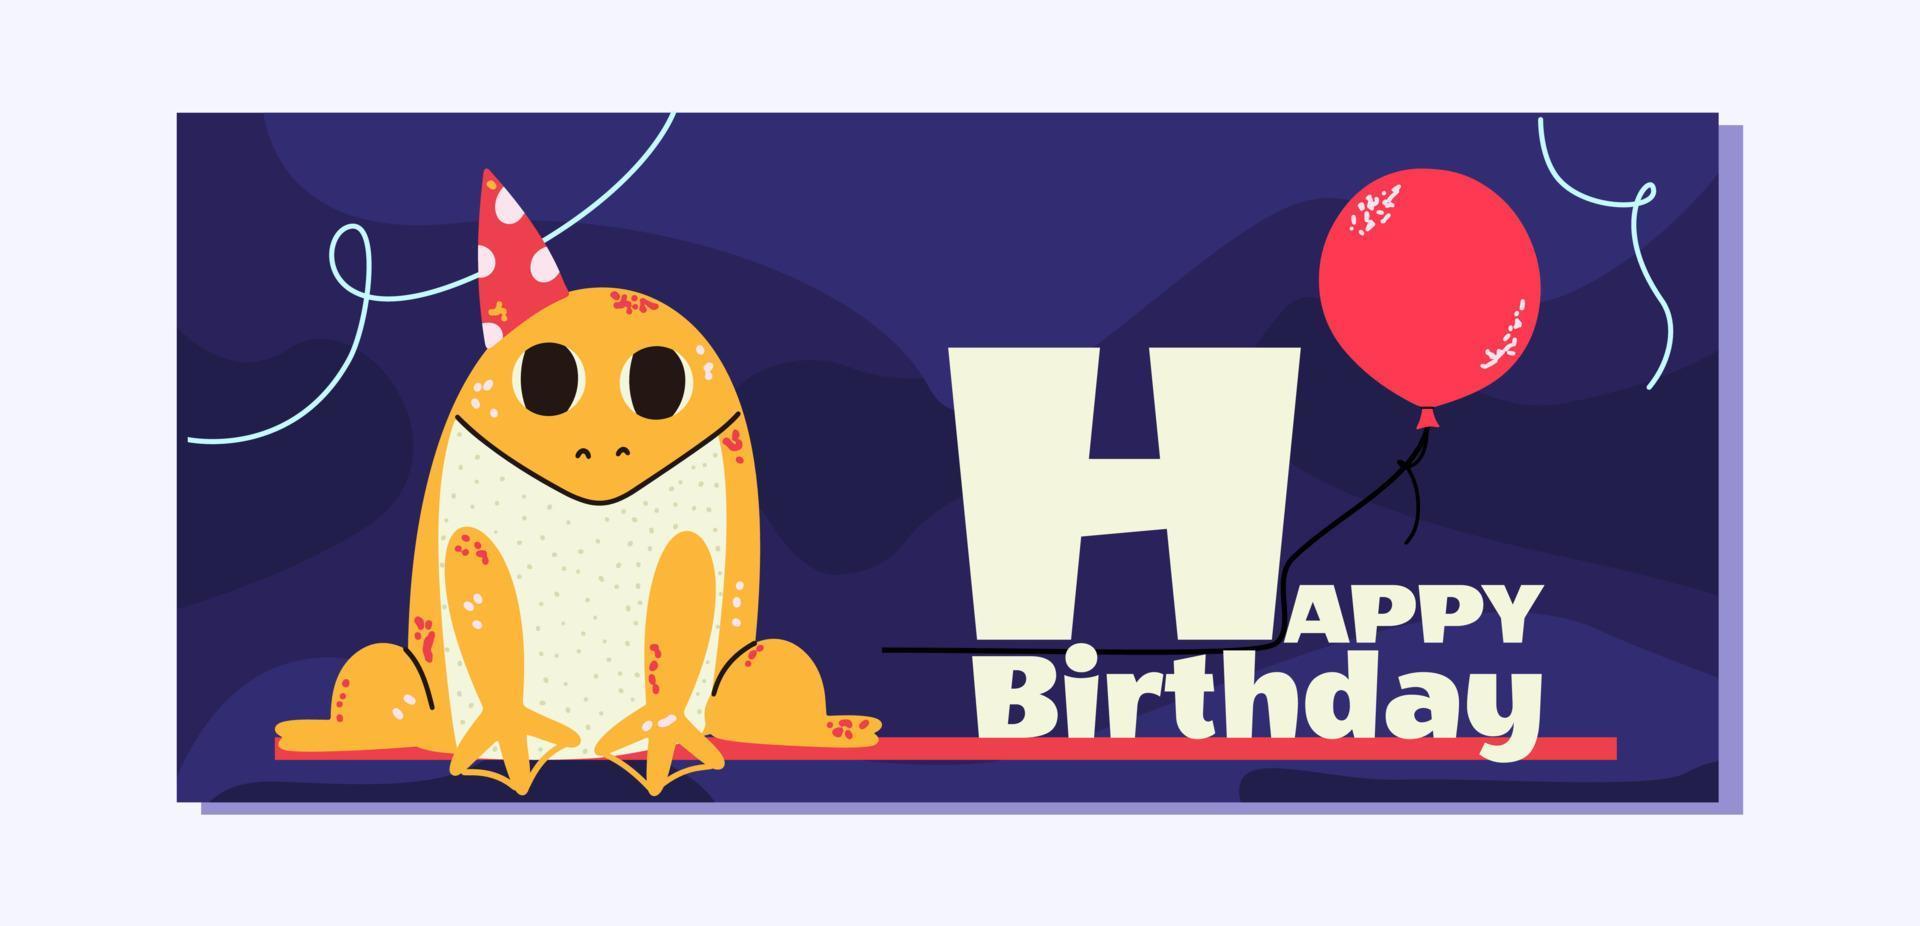 Birthday design template in flat style with frog. Vector illustration